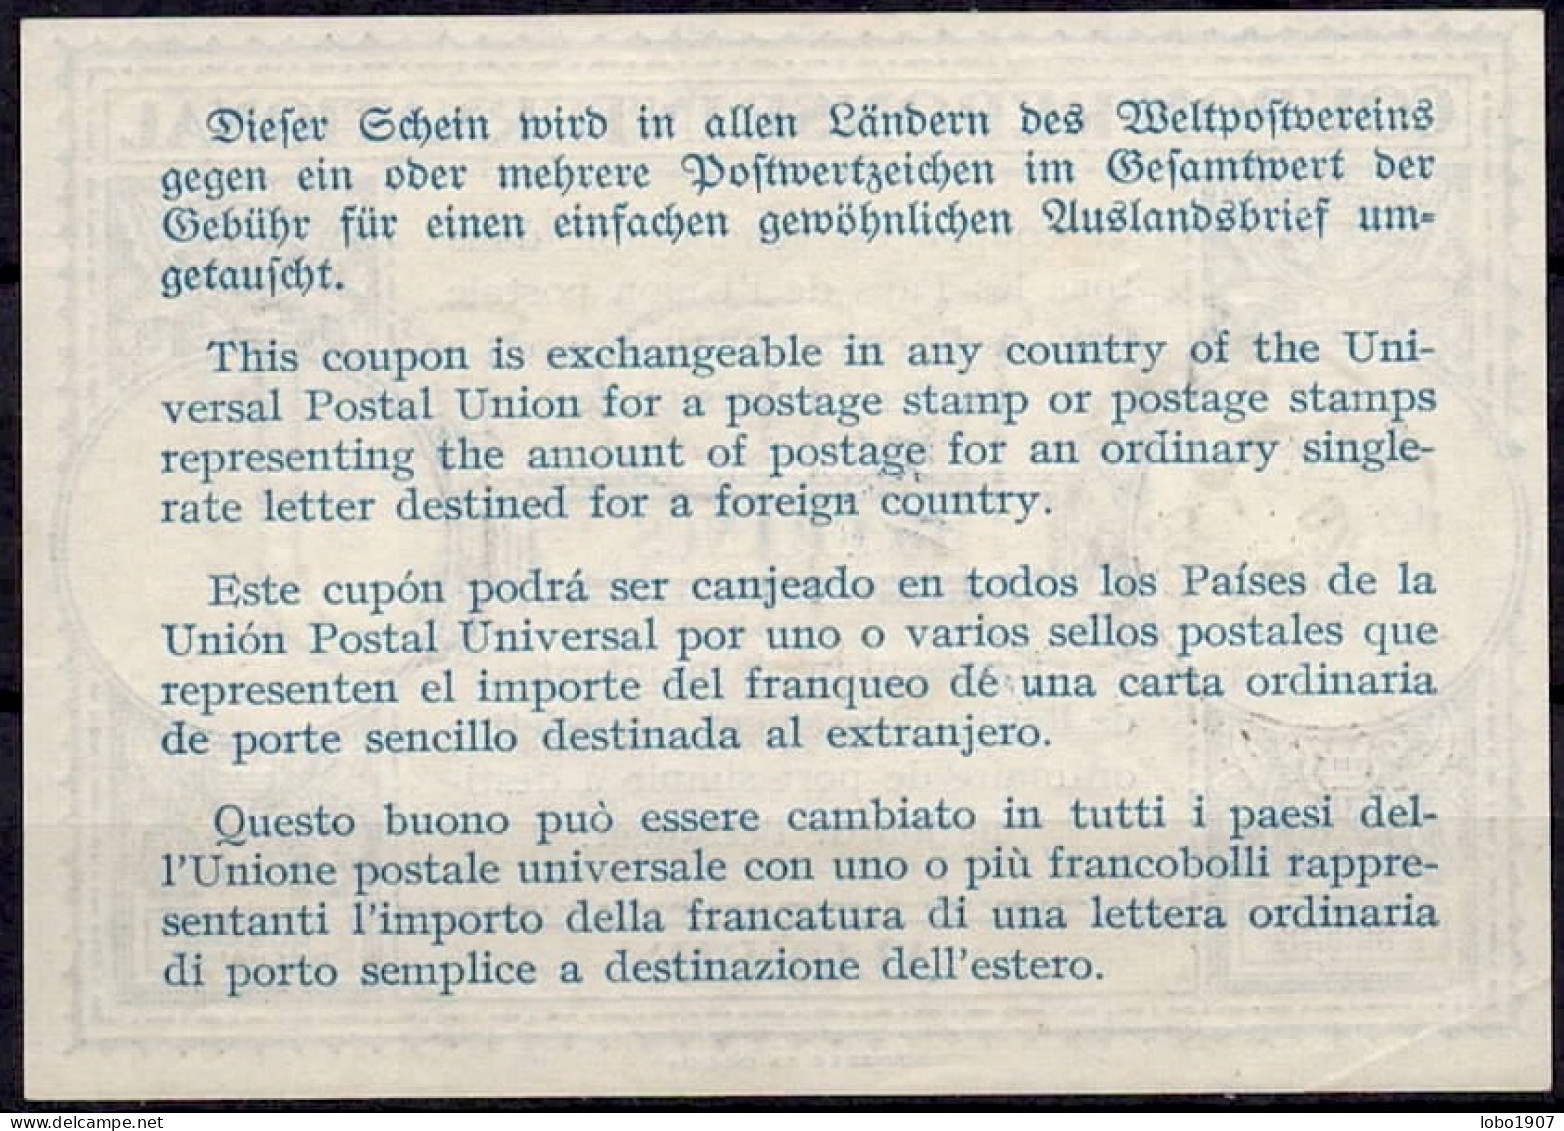 ALGERIE ALGERIA 1931- Ca 1990 Collection 20 International And National Reply Coupon Reponse Antwortschein IRC IAS - Algérie (1962-...)